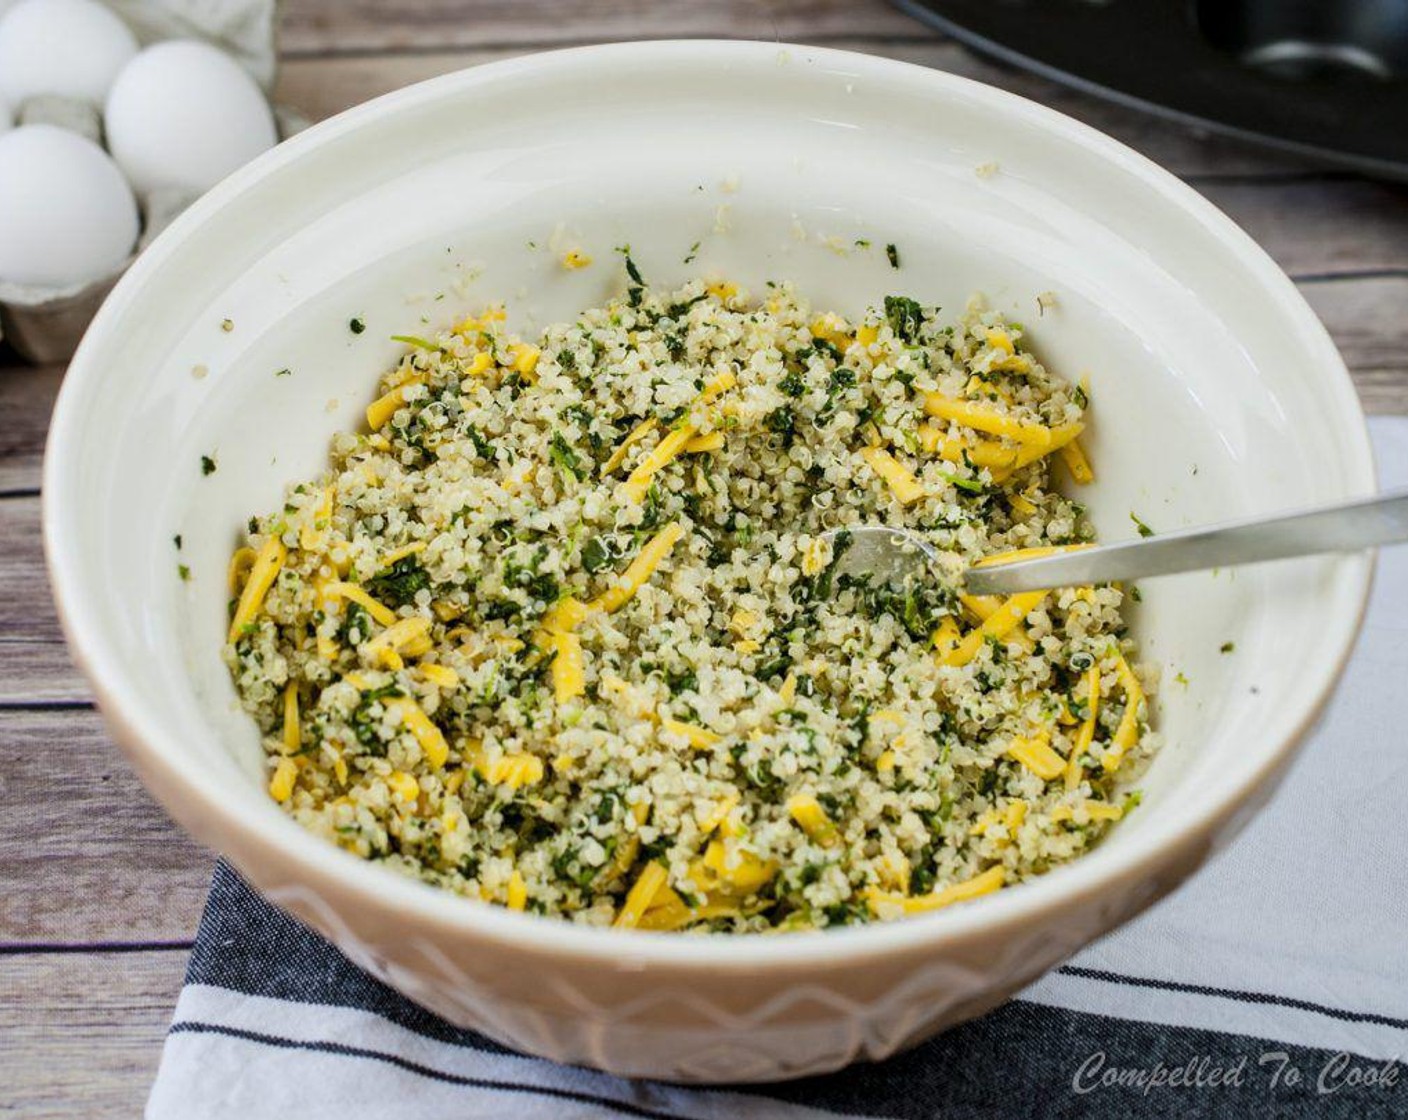 step 3 In a medium-sized bowl, stir together cooked Quinoa, Frozen Spinach (1 cup), Shredded Cheddar Cheese (3/4 cup), Grated Parmesan Cheese (1/2 cup), Dijon Mustard (1 tsp), Dried Oregano (1 tsp), McCormick® Garlic Powder (1/4 tsp), Kosher Salt (1/2 tsp), and Ground Black Pepper (1/4 tsp).